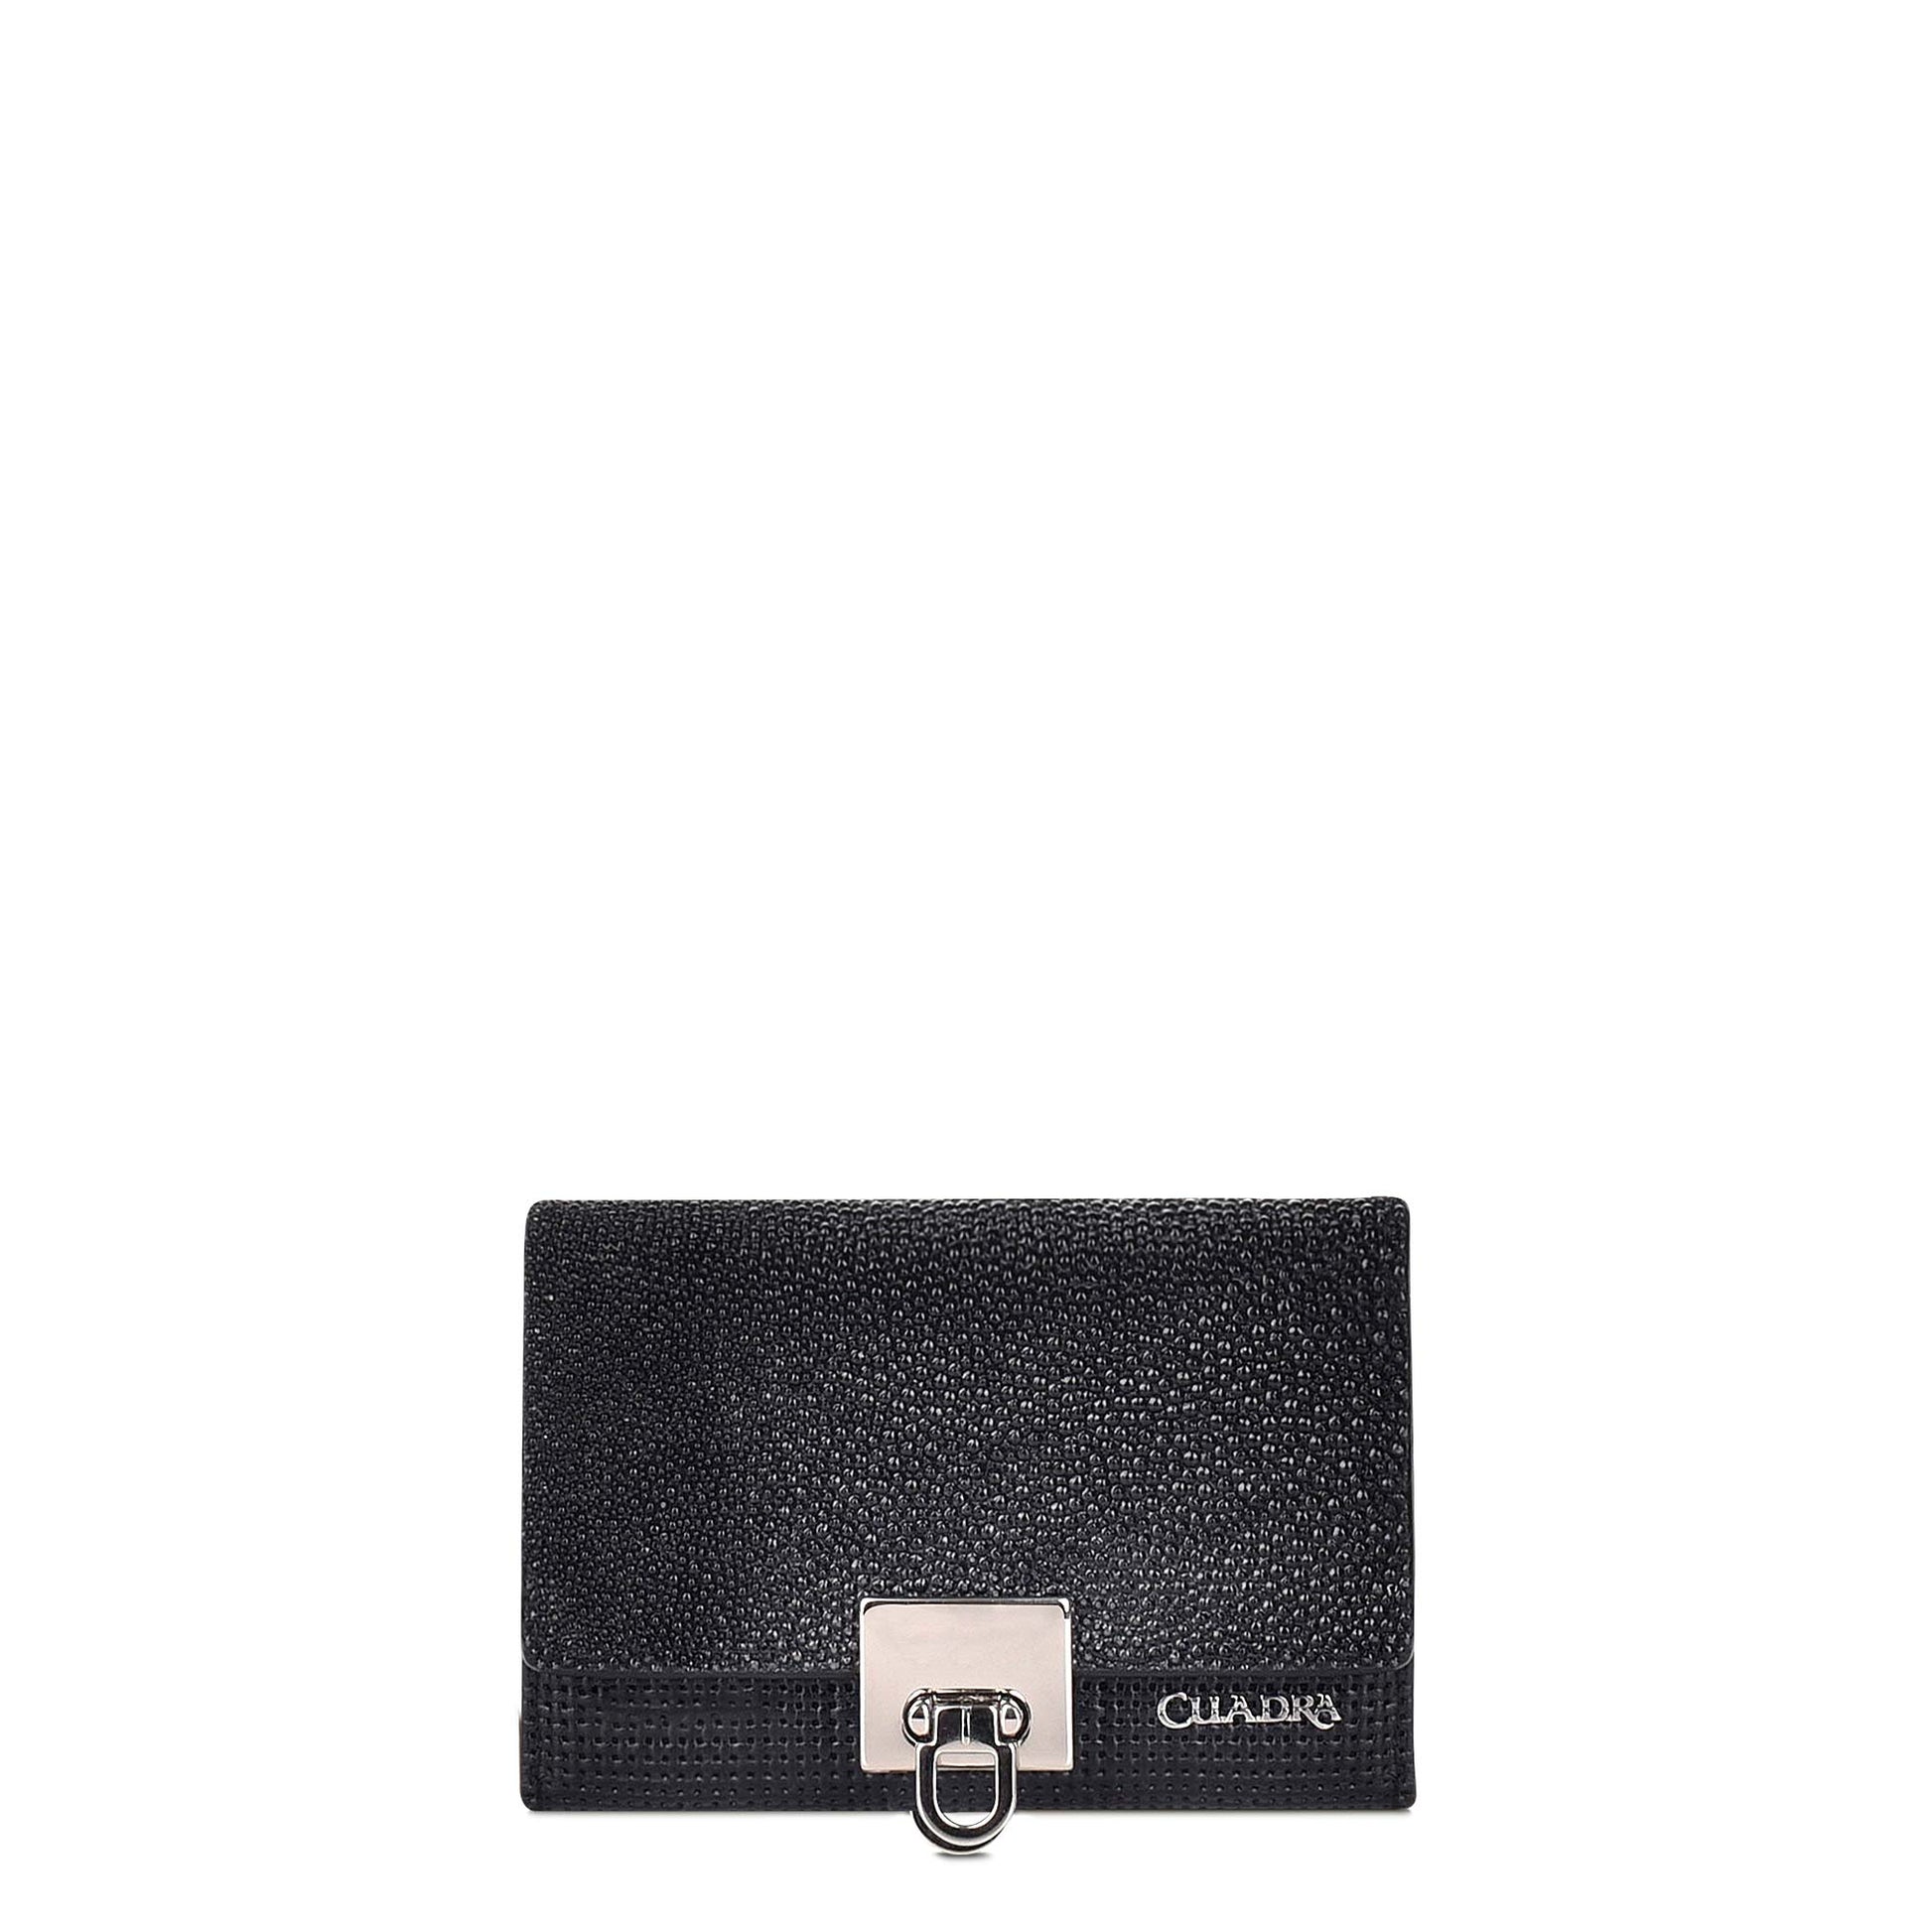 Engraved black leather trifold wallet, for women in stingray leather